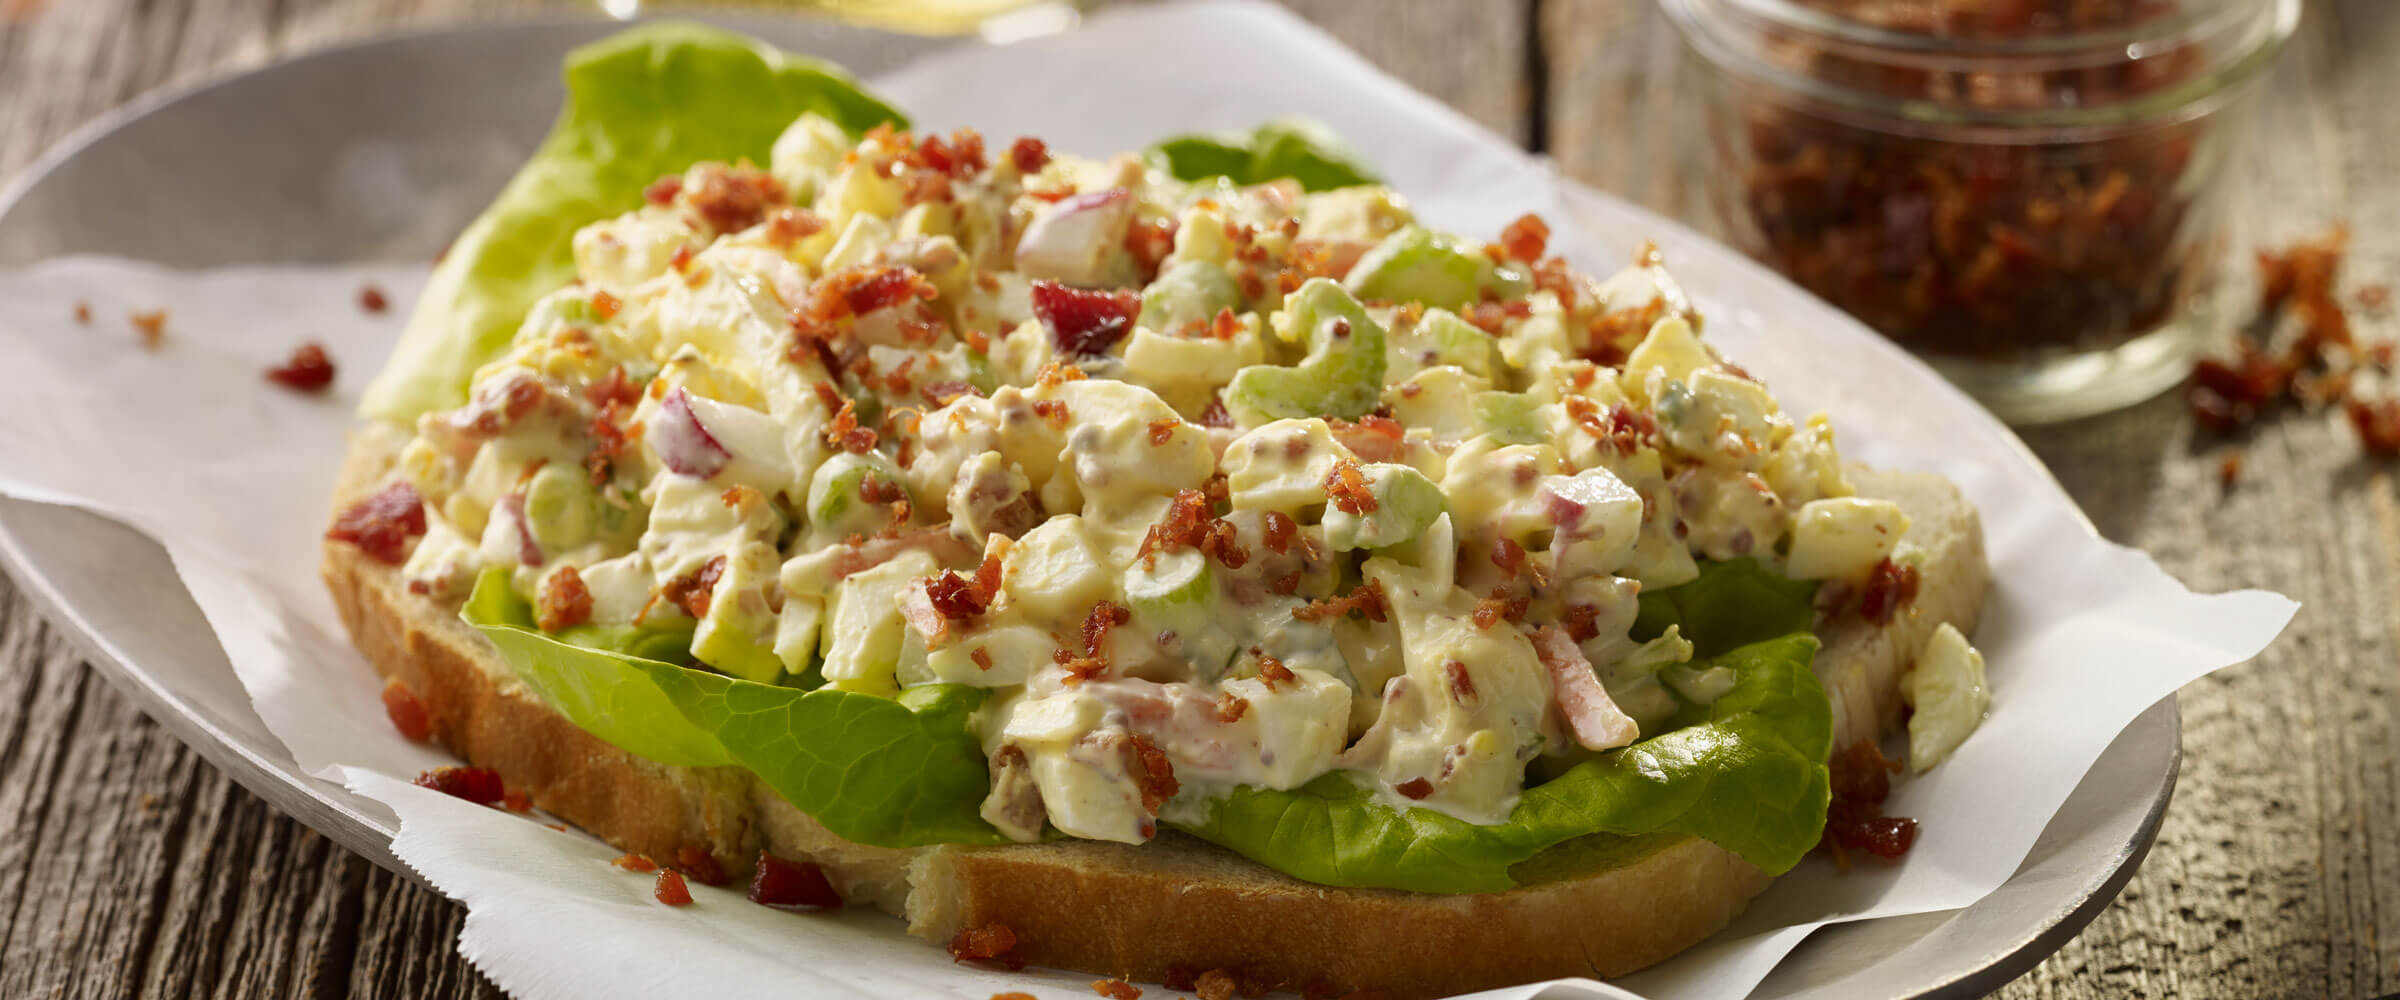 Garden egg salad with bacon on slice of bread on parchment paper